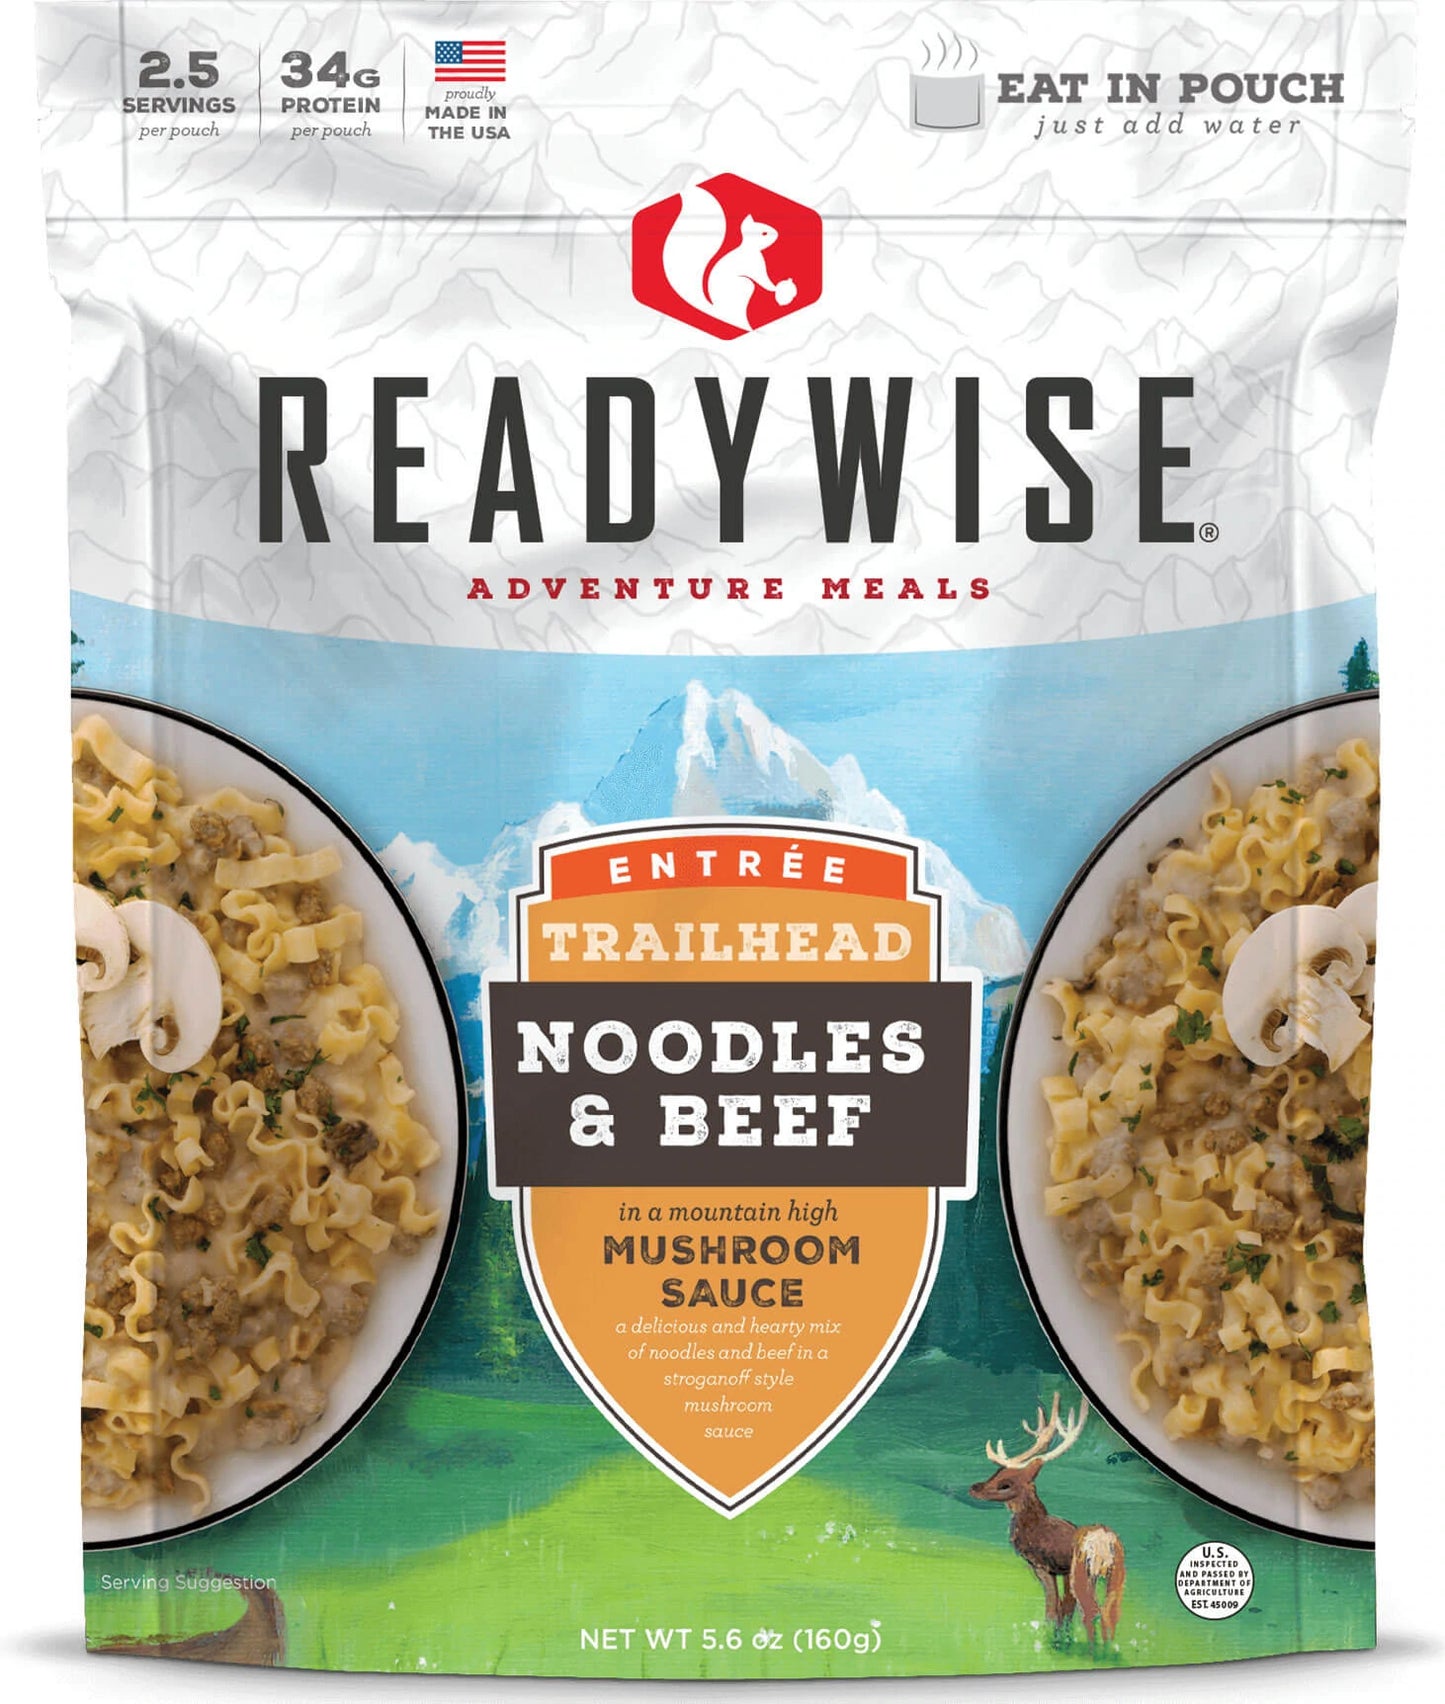 Readywise Trailhead Noodles & Beef - KBM Outdoors